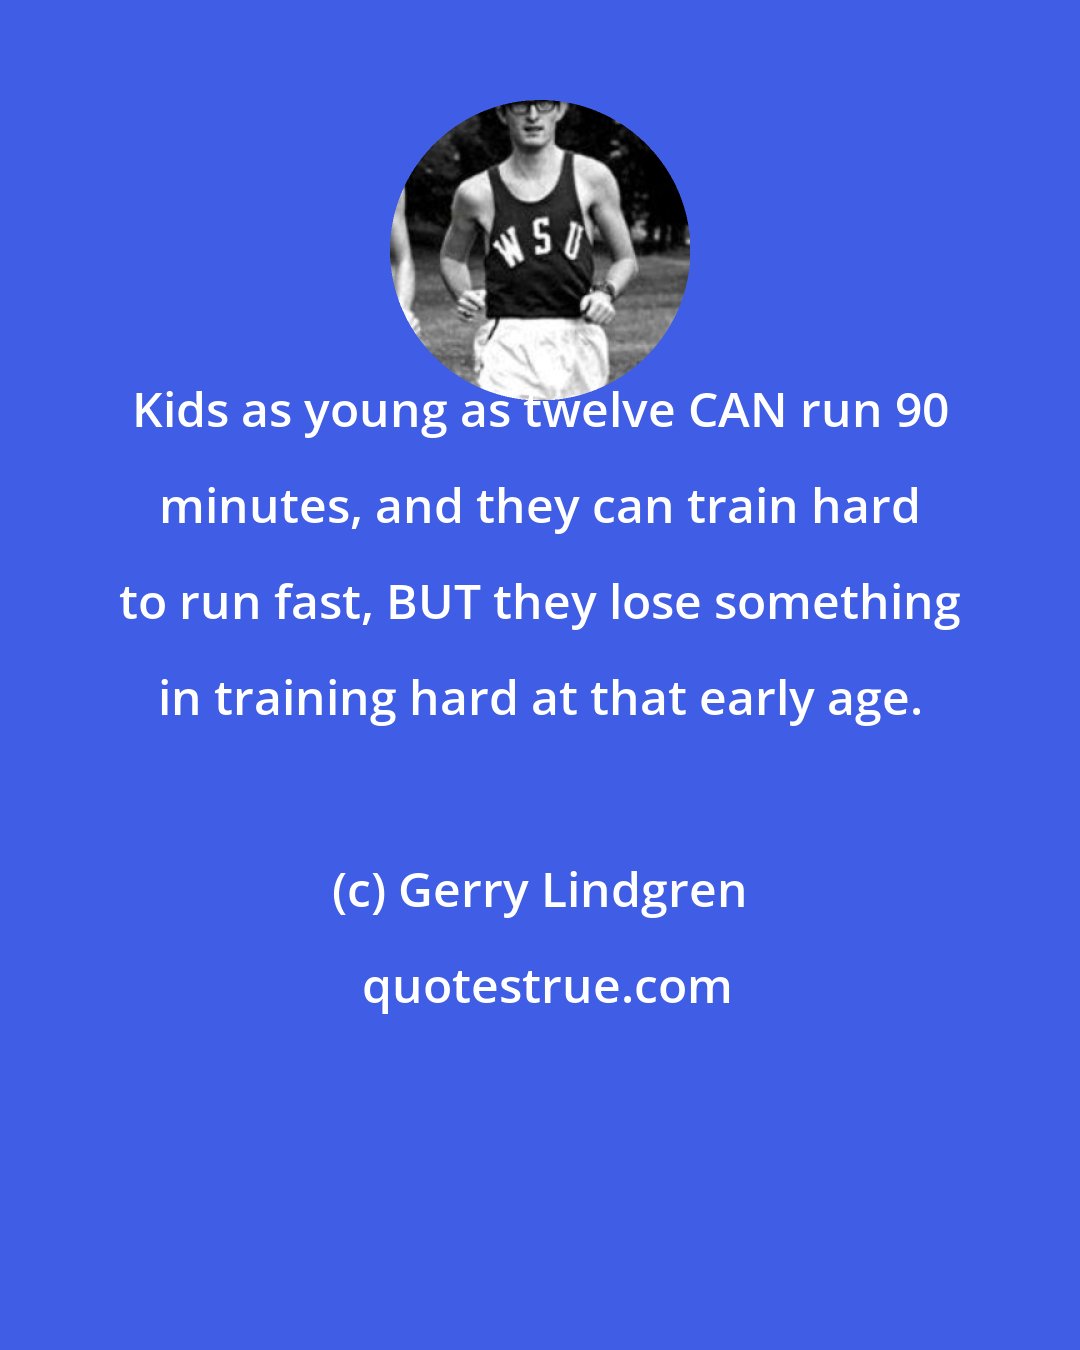 Gerry Lindgren: Kids as young as twelve CAN run 90 minutes, and they can train hard to run fast, BUT they lose something in training hard at that early age.